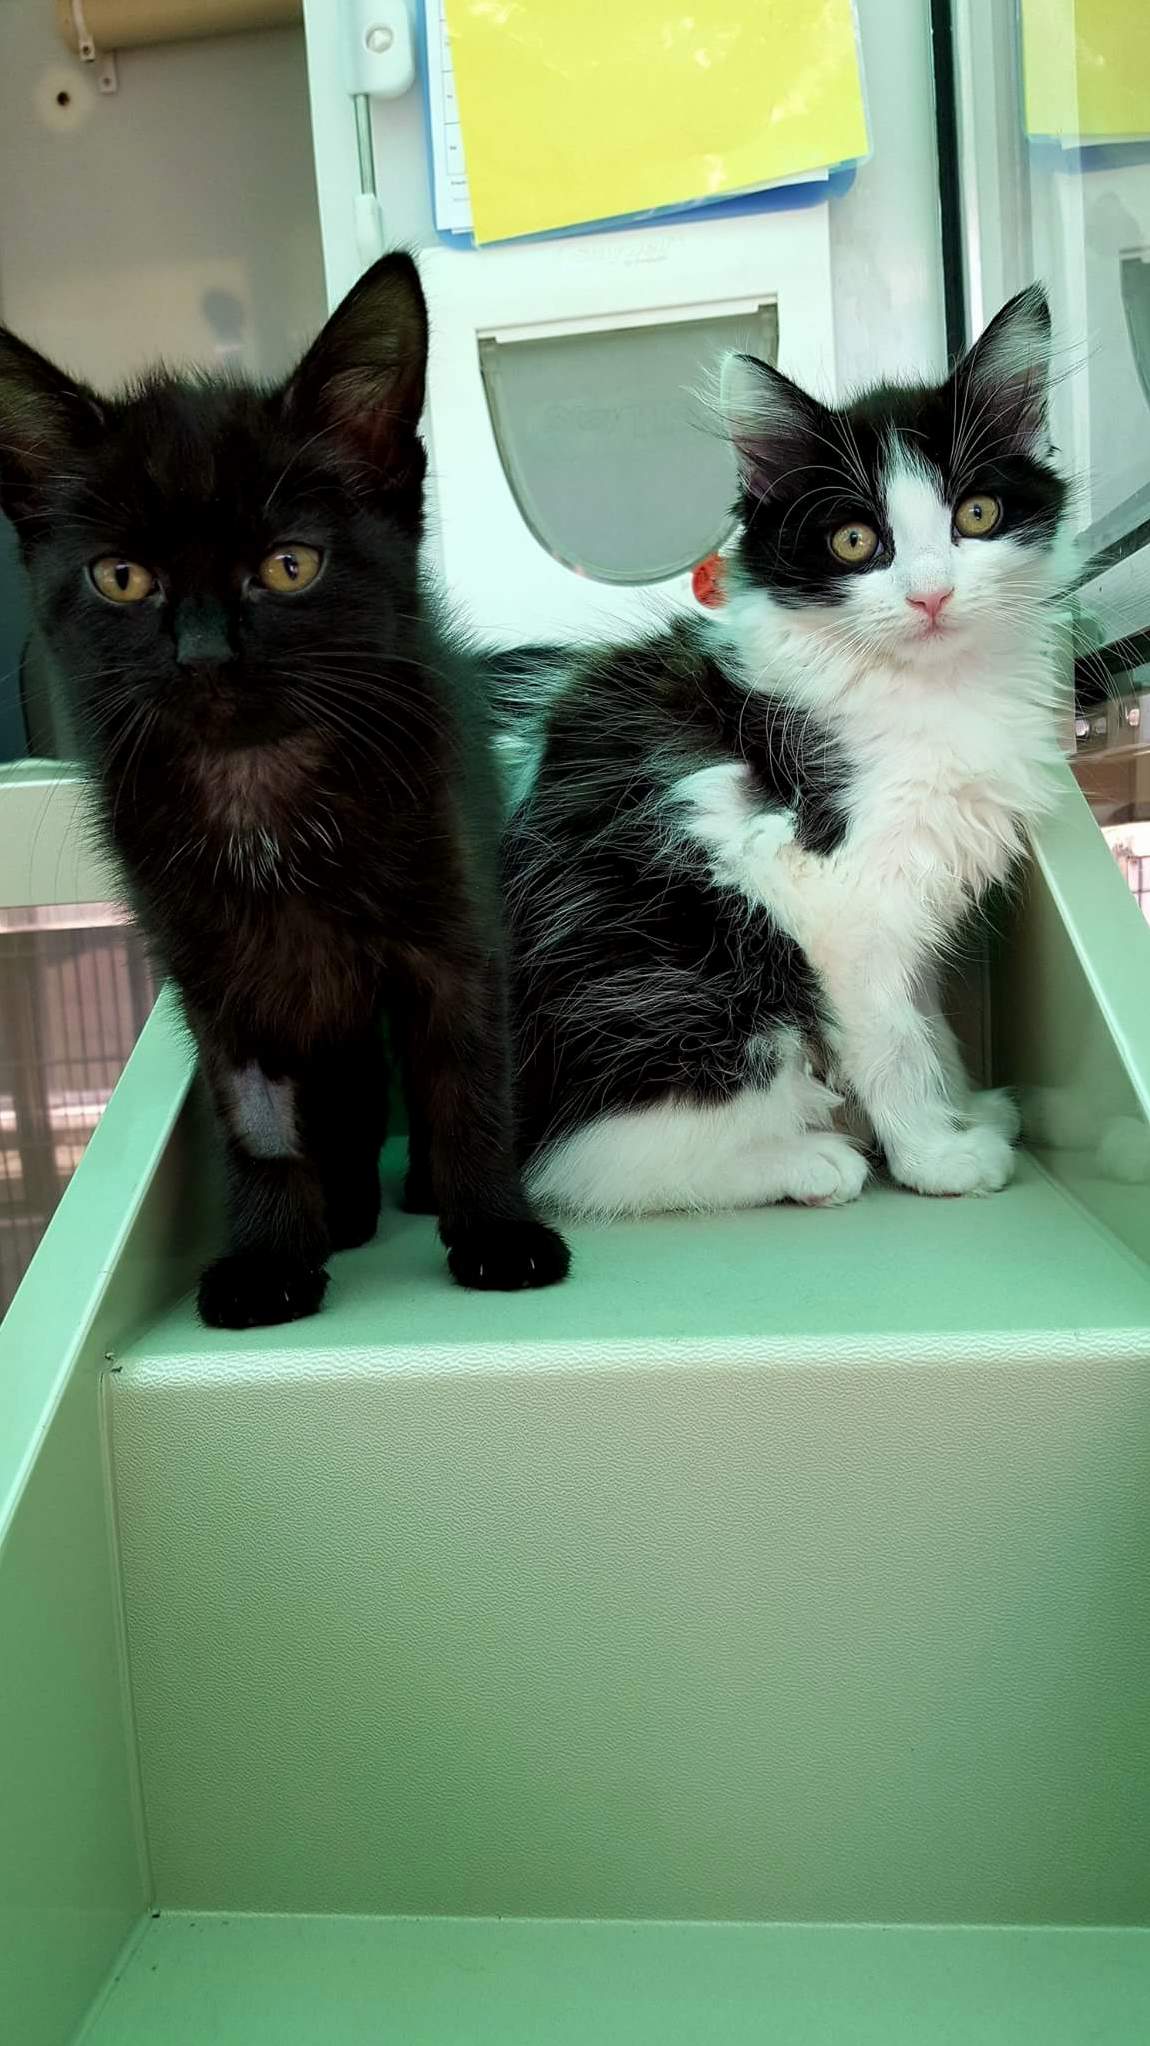 So excited to be adopting these 2 today